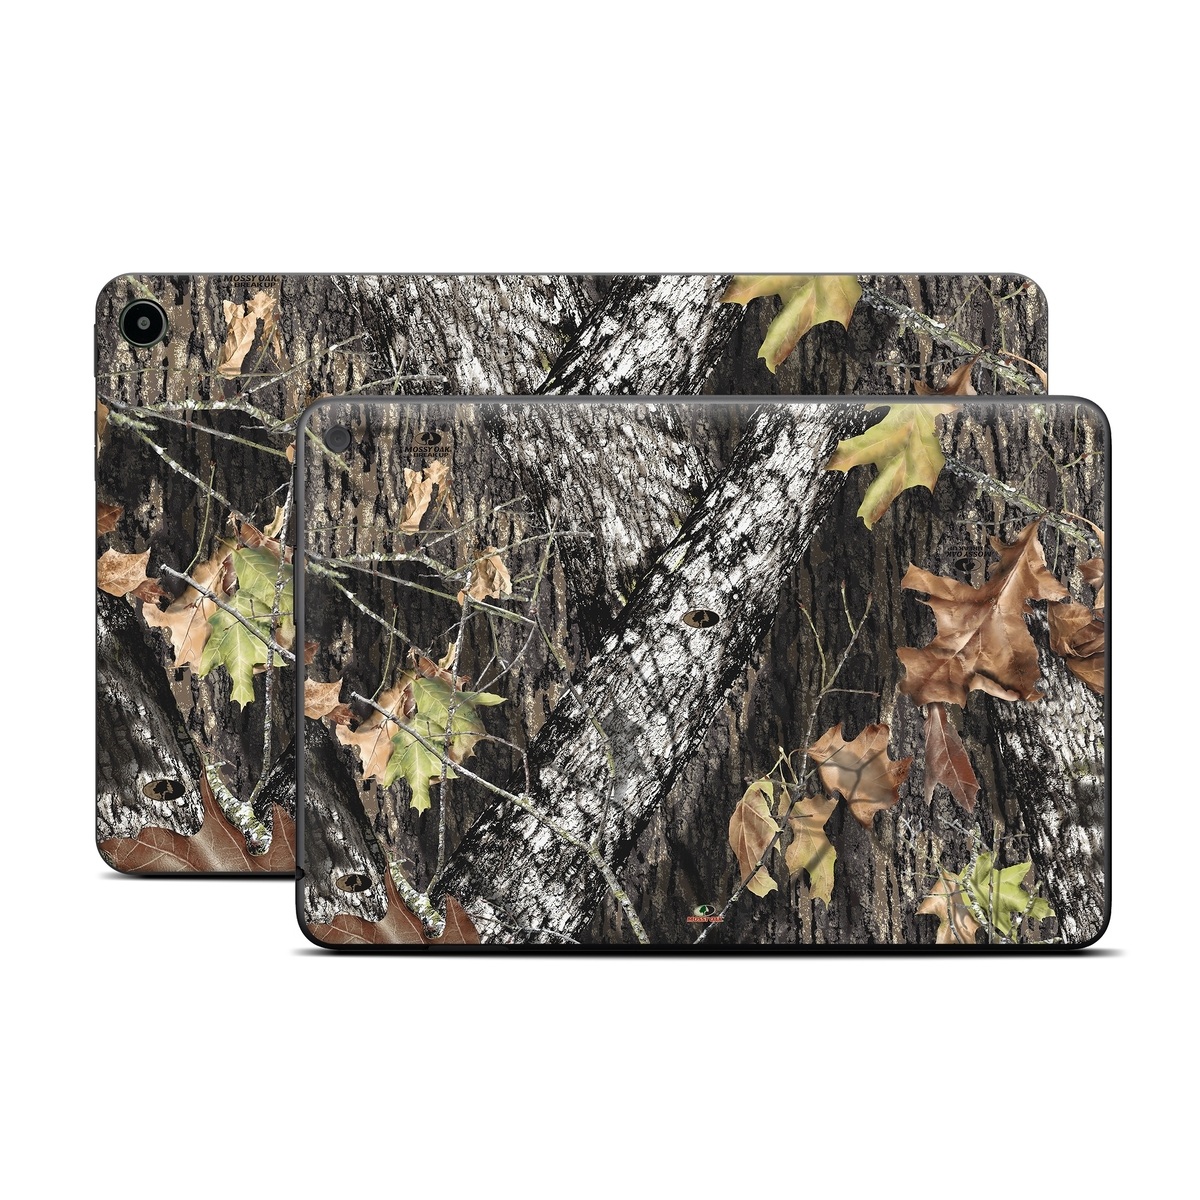  Skin design of Leaf, Tree, Plant, Adaptation, Camouflage, Branch, Wildlife, Trunk, Root, with black, gray, green, red colors